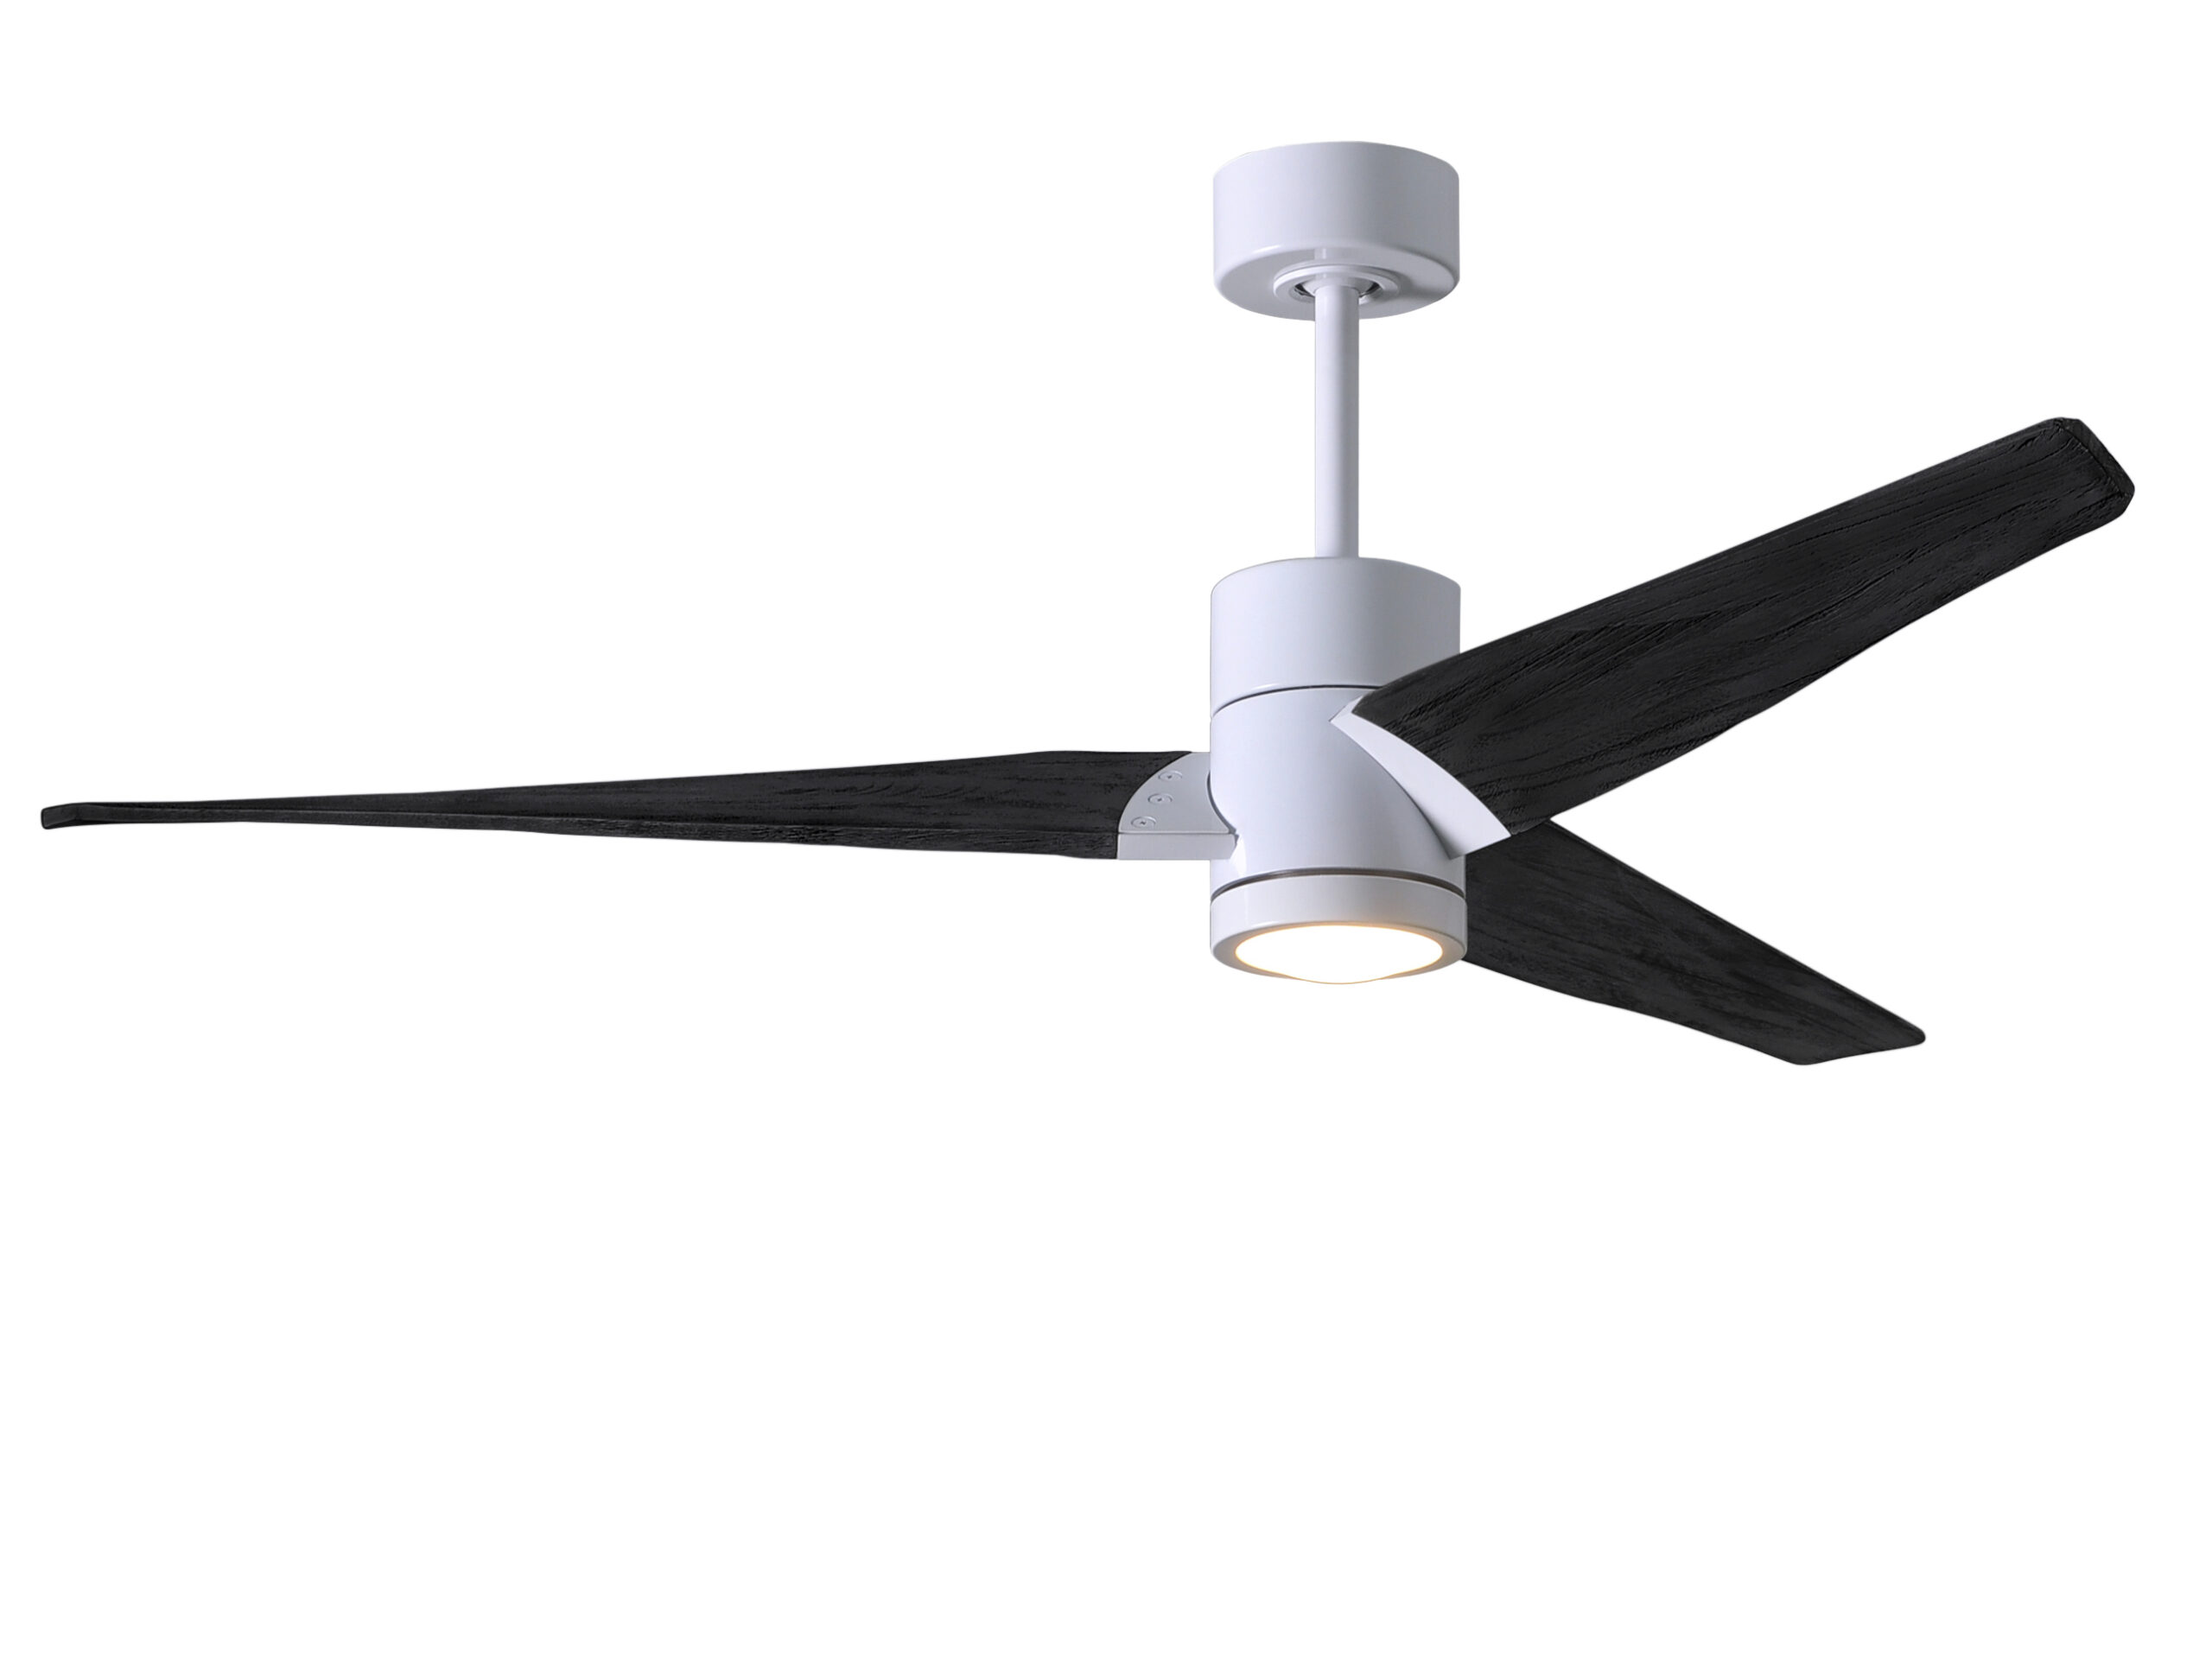 Super Janet ceiling fan in Gloss White with 52” Matte Black bl